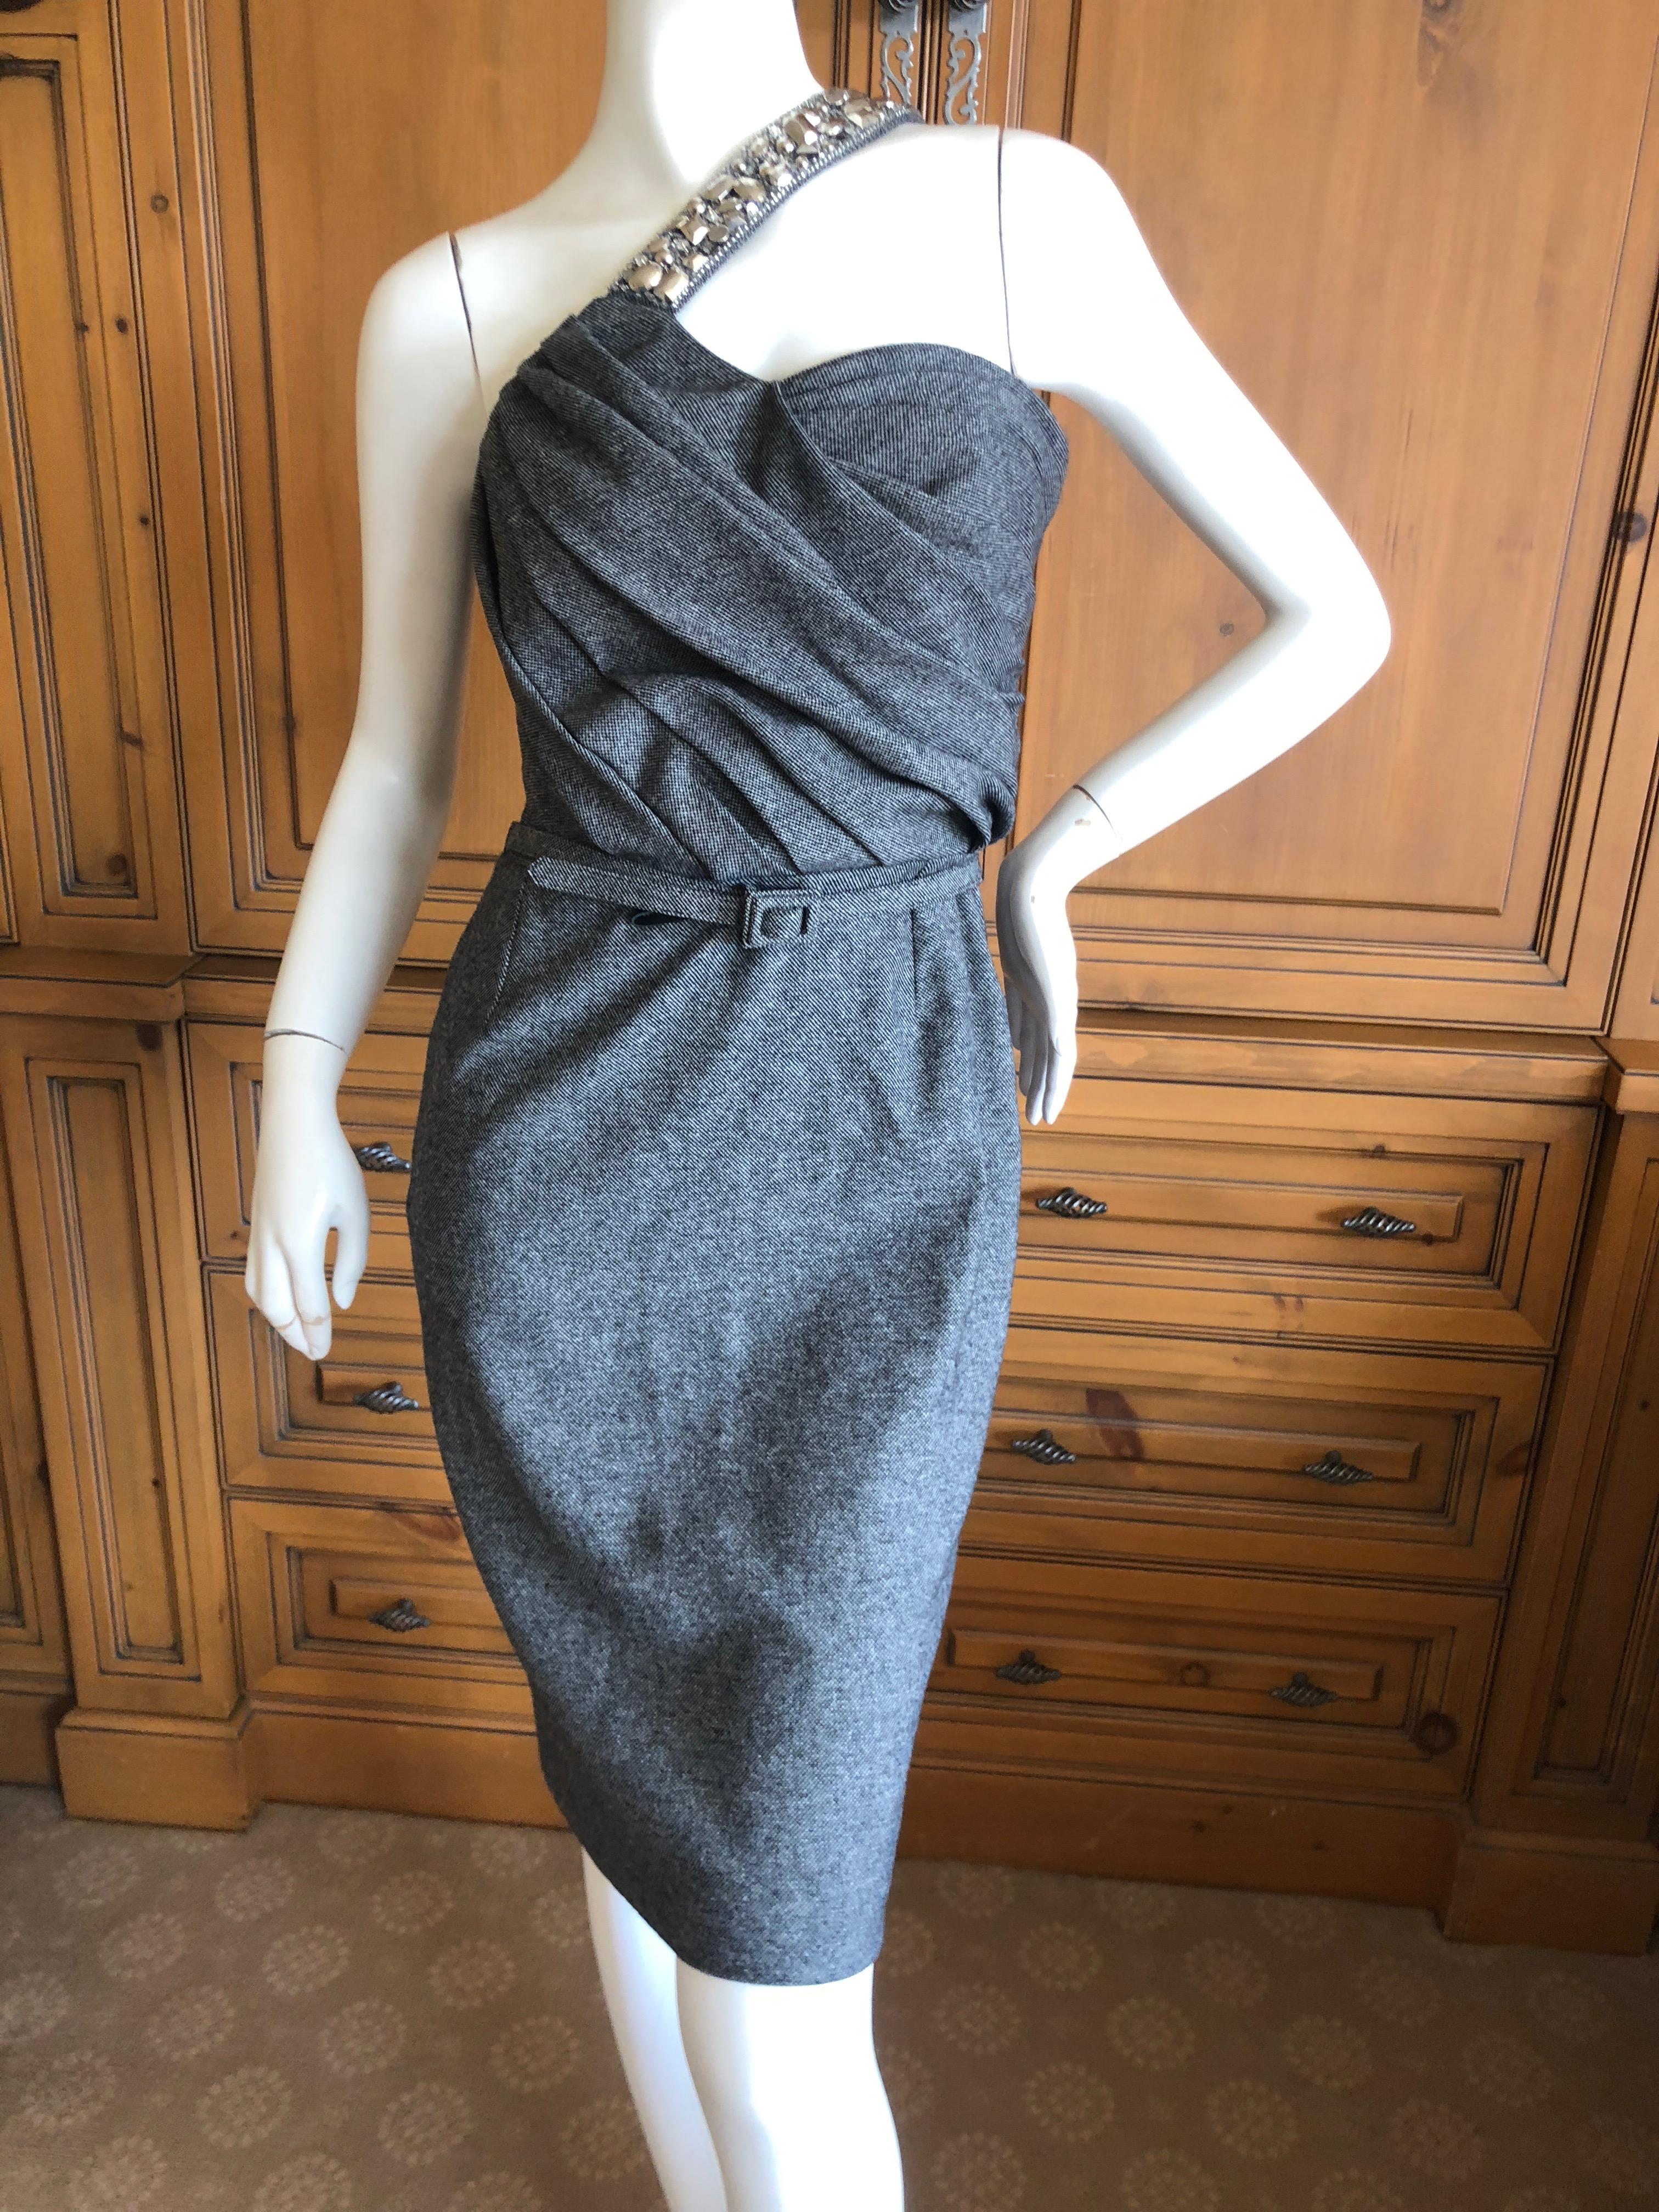 Christian Dior John Galliano Gray Tweed Cocktail Dress w Jewel Shoulder Strap.
I'm not  certain which way the strap lies, I show it two different ways.
 Size 38
Bust 34